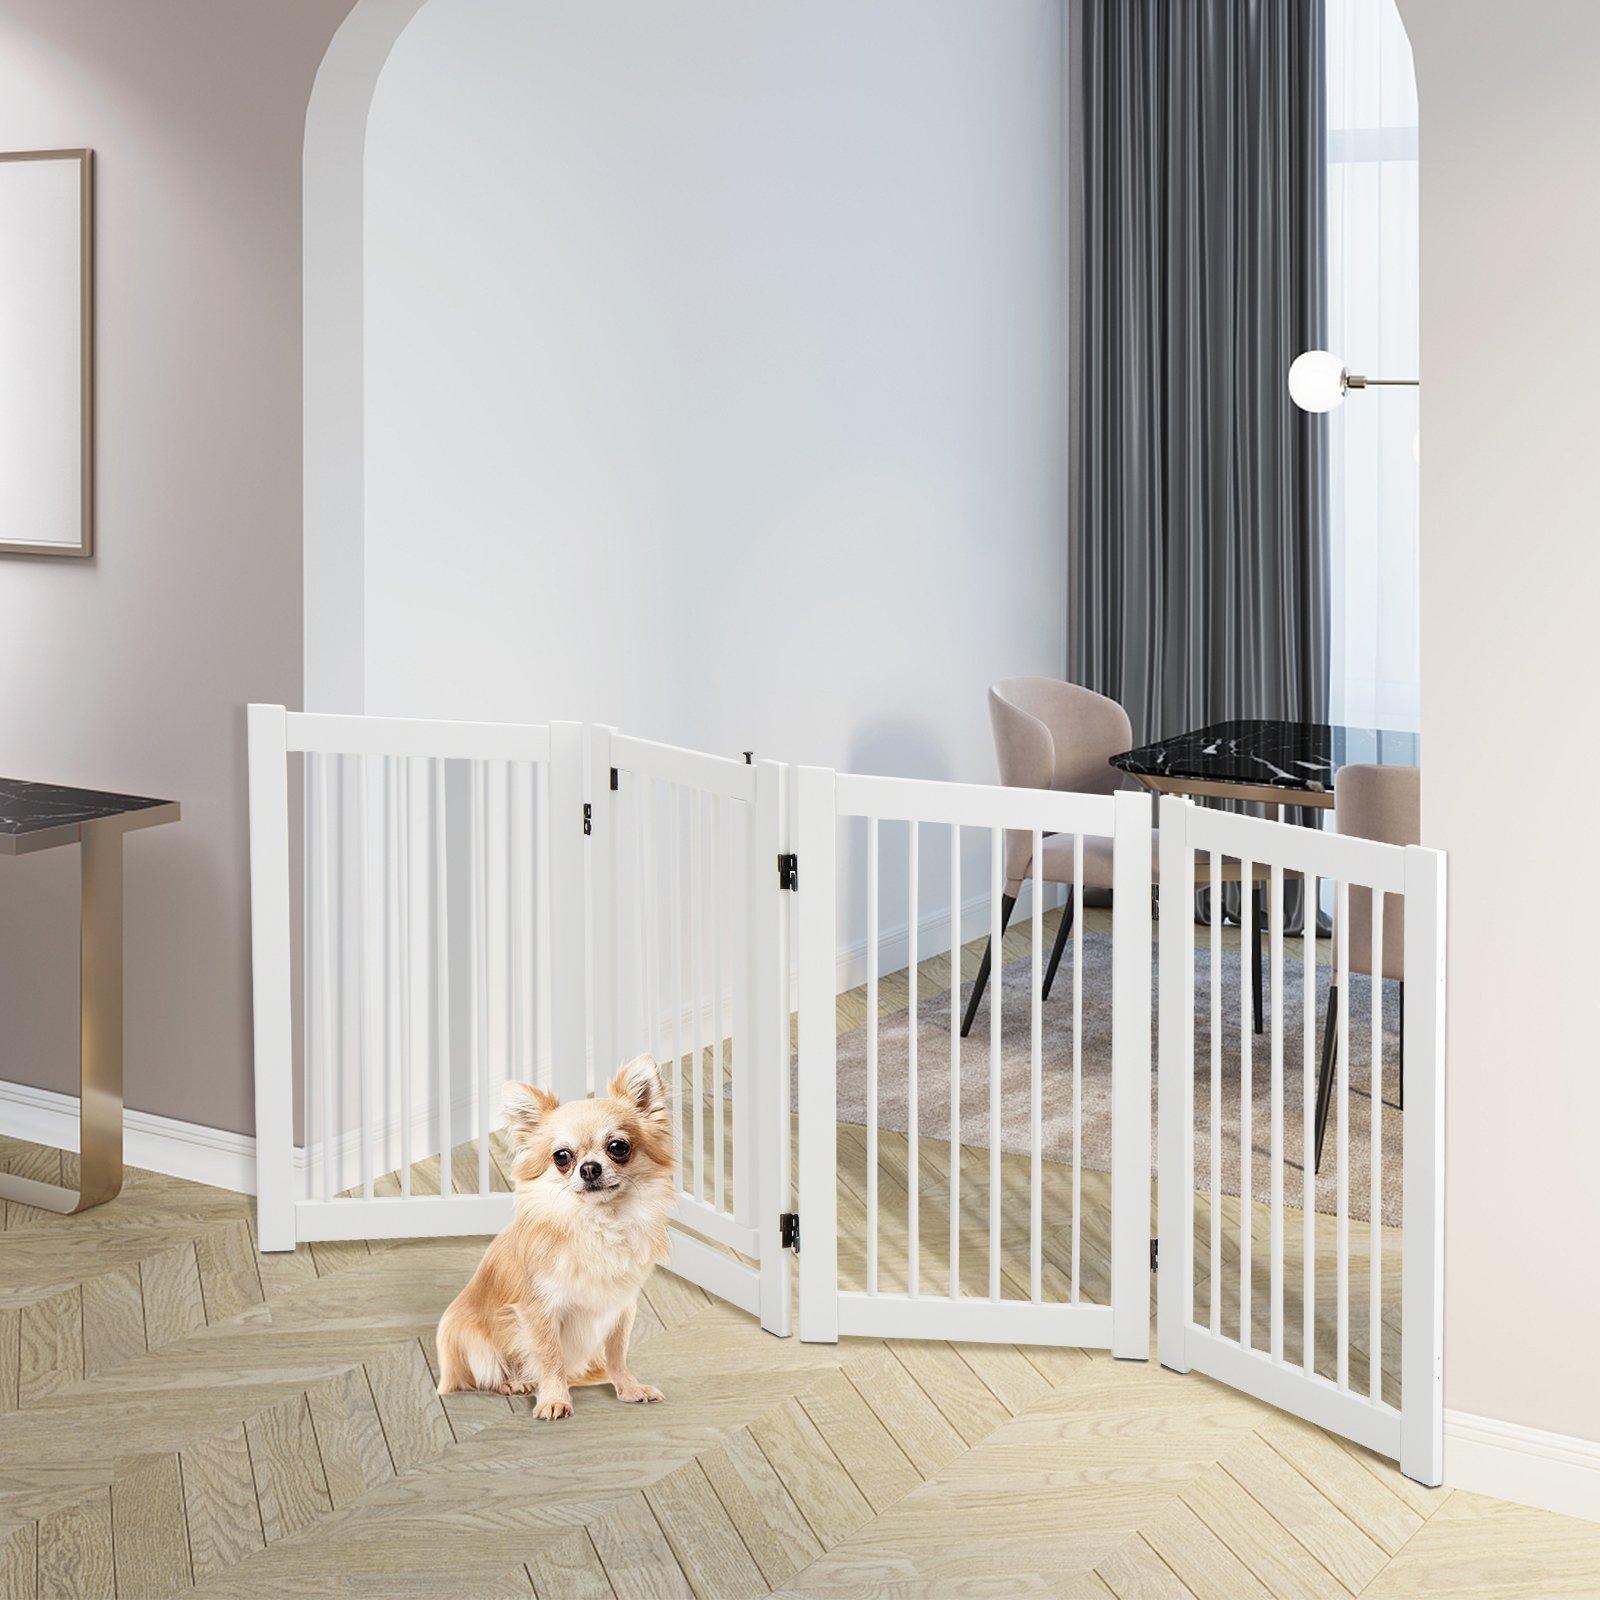 76 cm Tall Dog Gate with Door Folding 4 Panels Pet Gate for Stairs Hallways